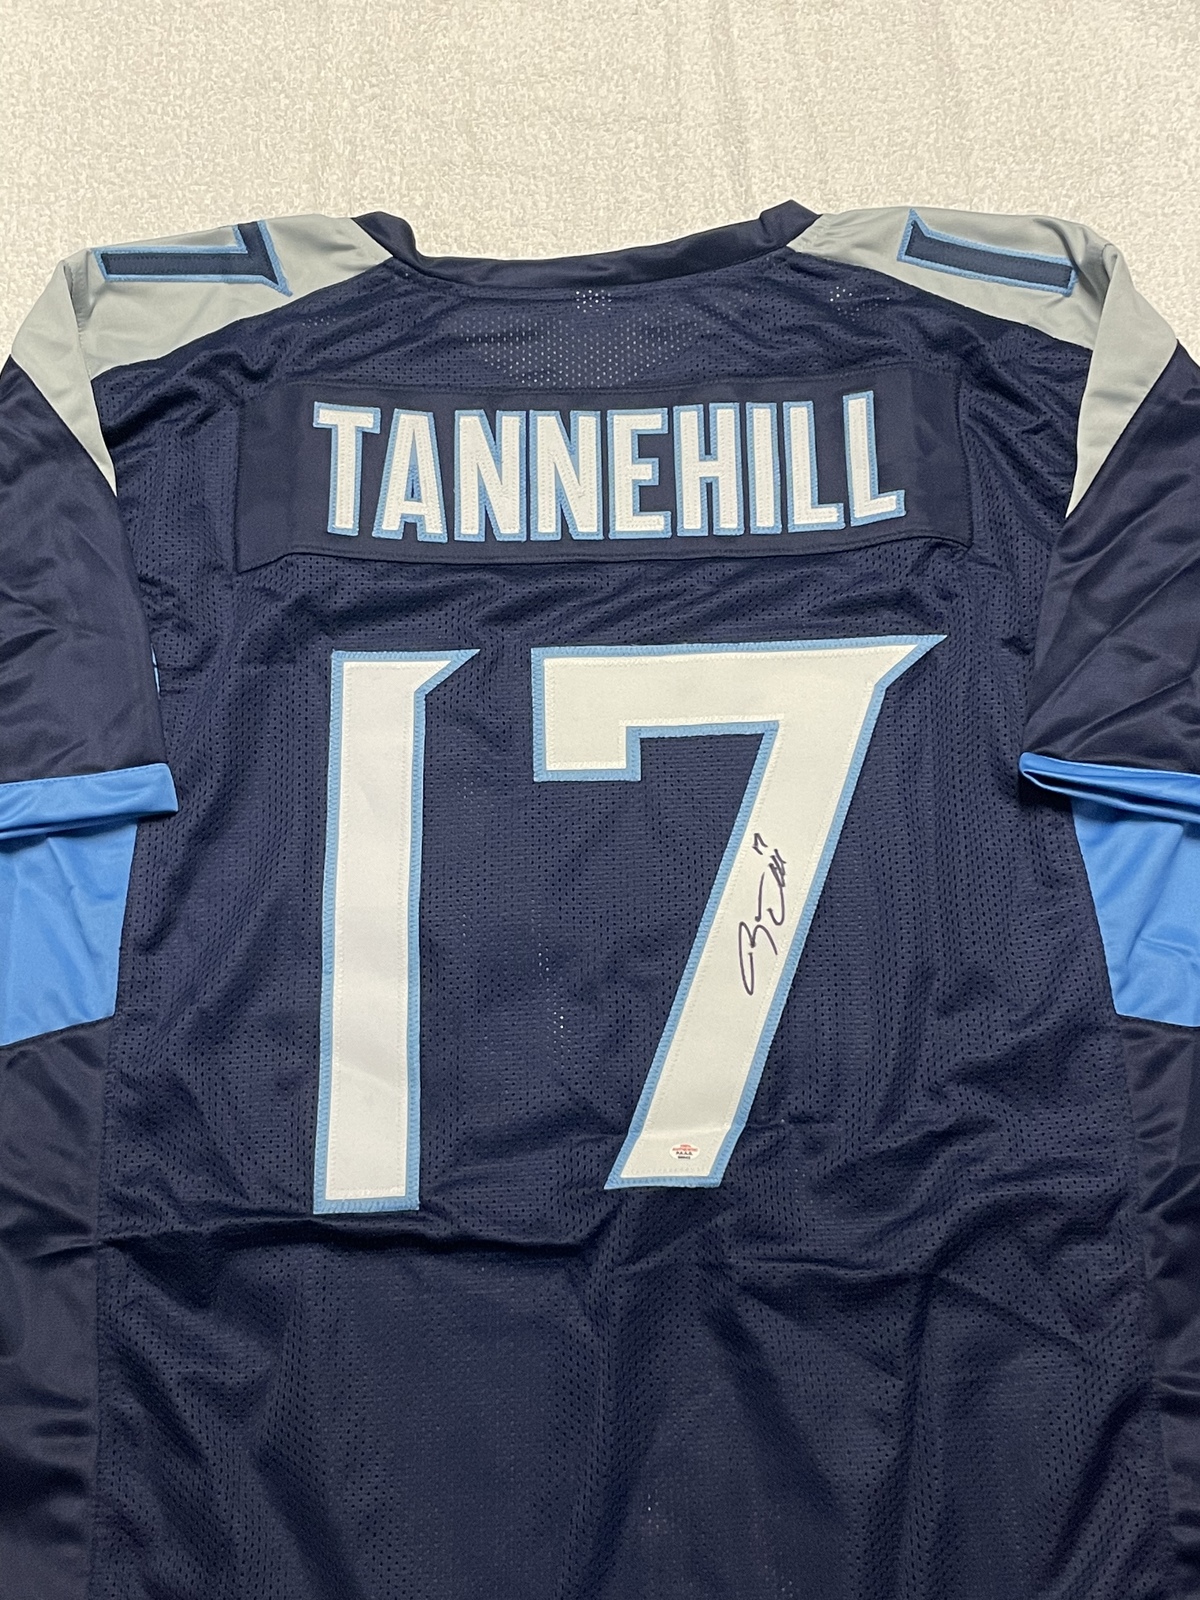 Primary image for Ryan Tannehill Signed Tennnessee Titans Football Jersey COA